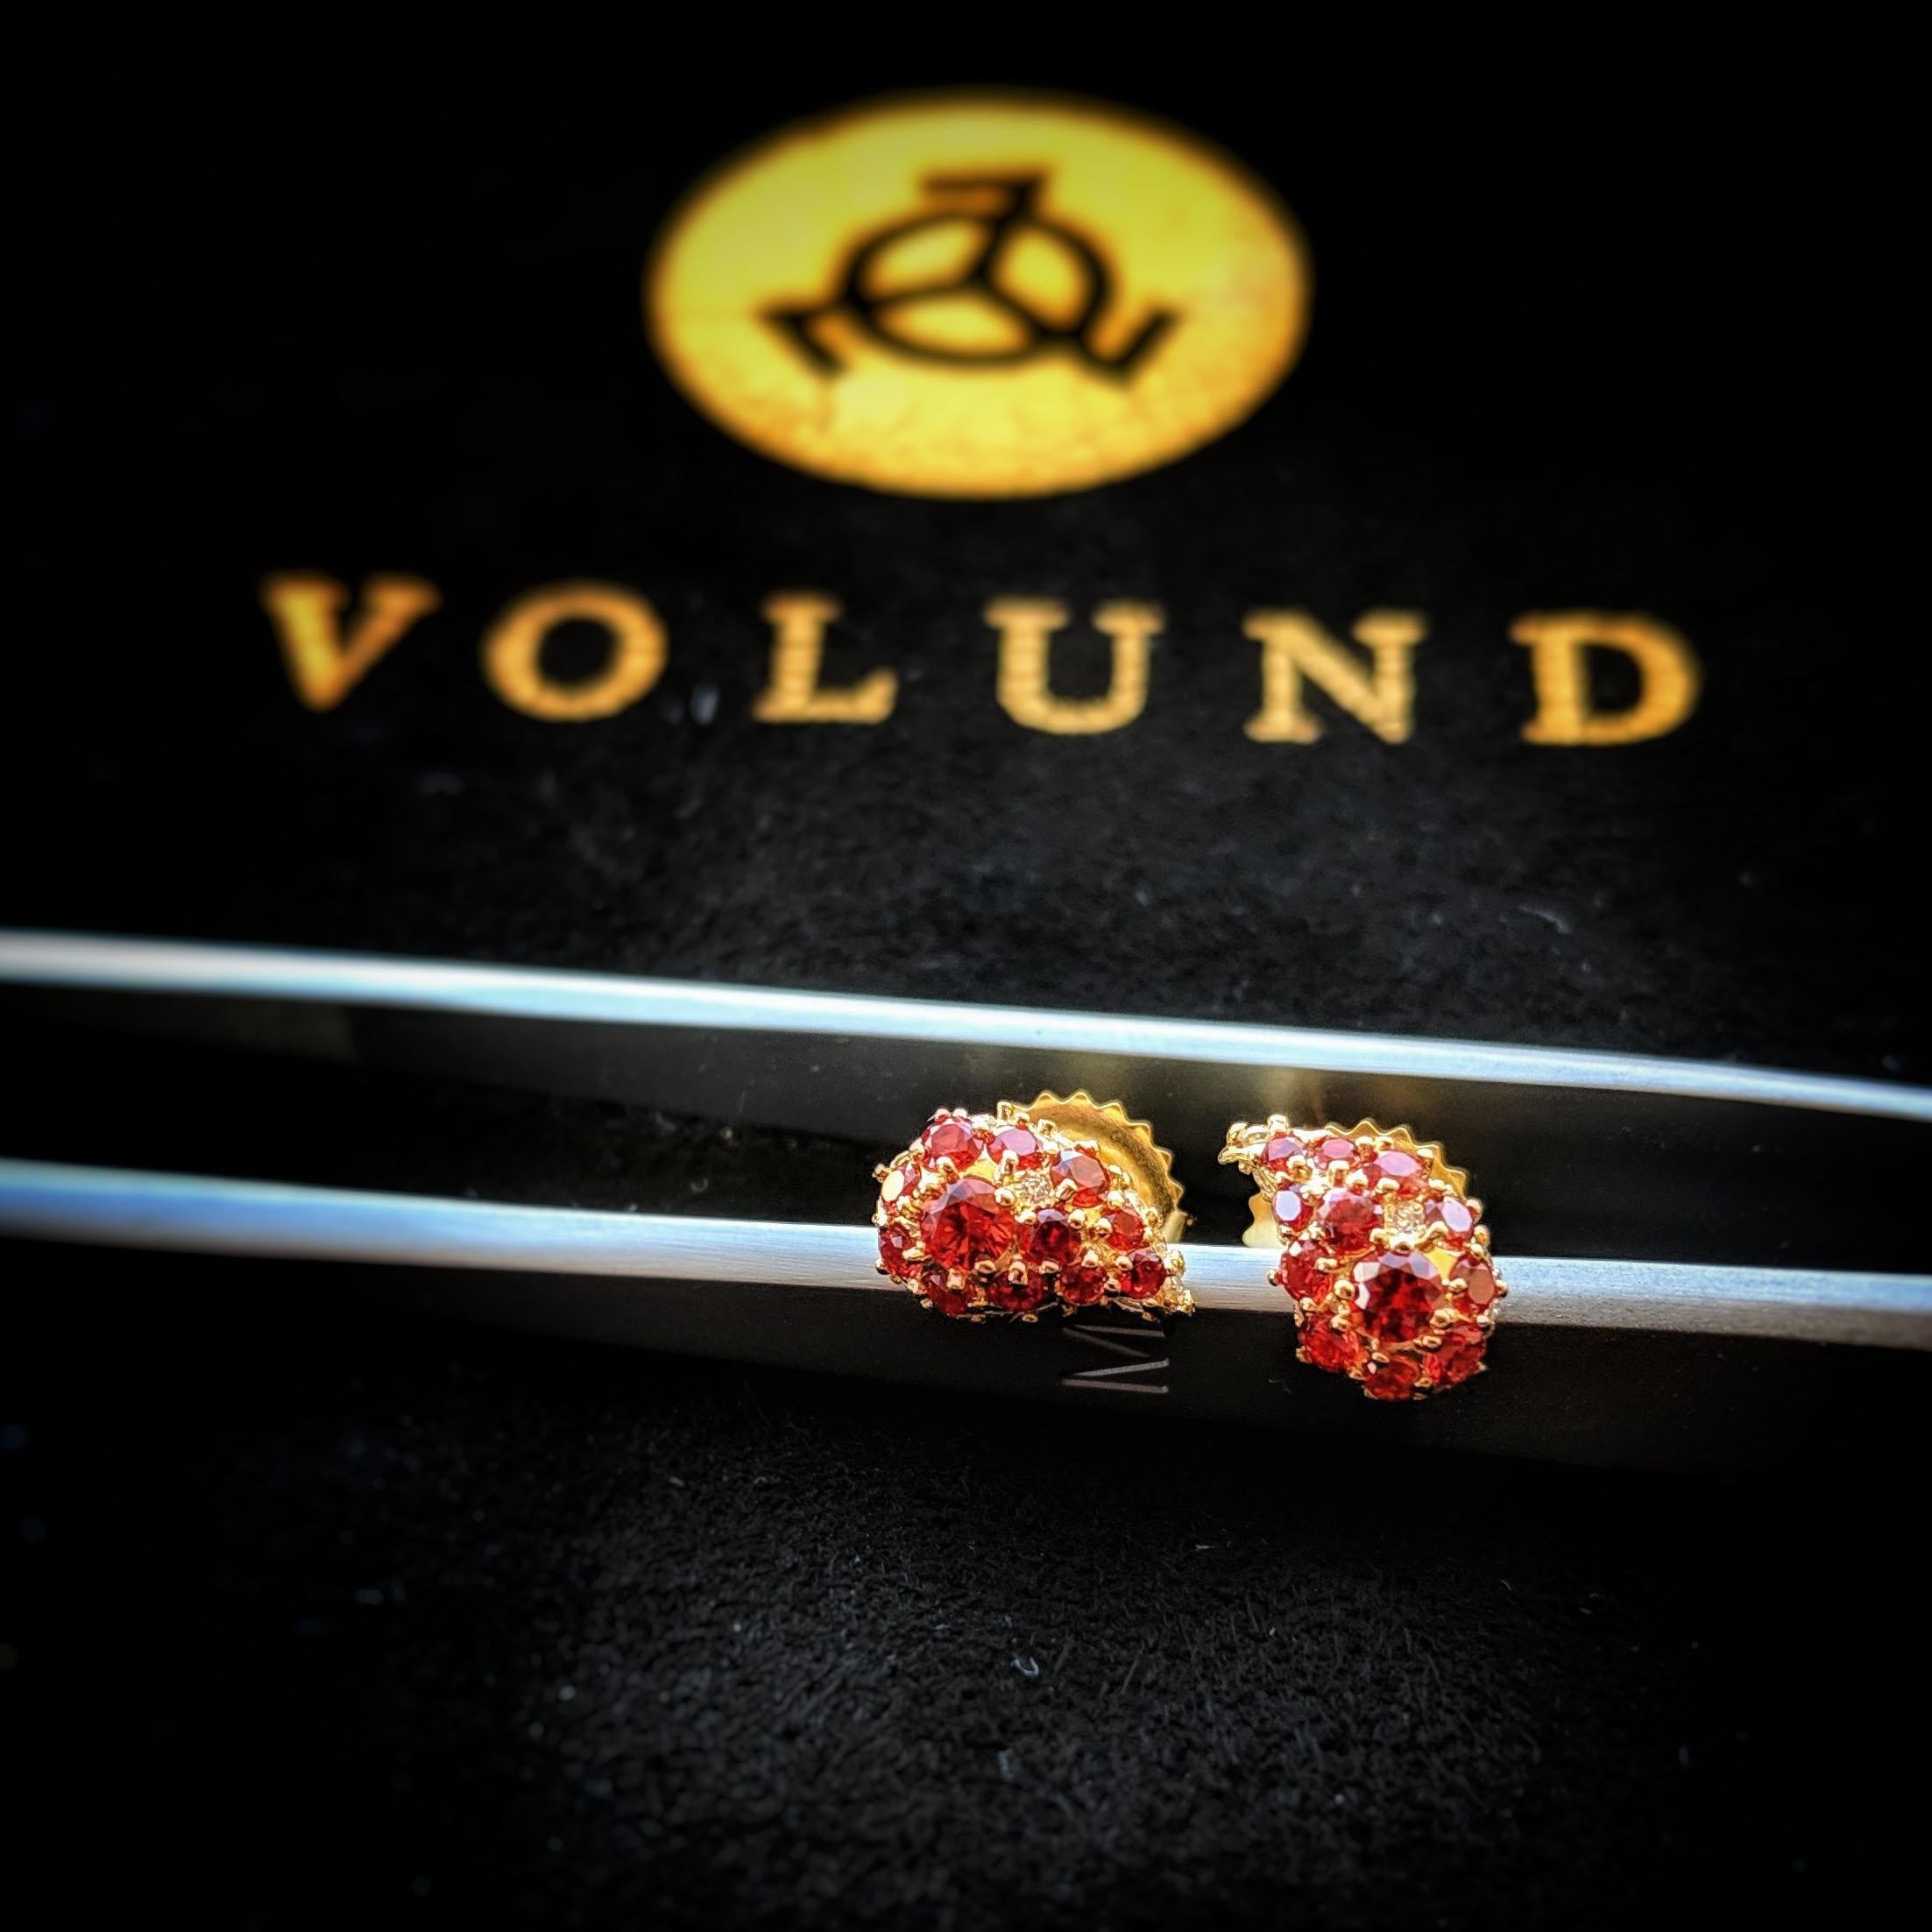 These stud earrings in 18K yellow gold are pave set with perfectly cut rubies and resemble the shape of a paisley or teardrop. Subtle and elegant, these exotic earrings are a fine example of high end designer jewel.

Long thought to depict the